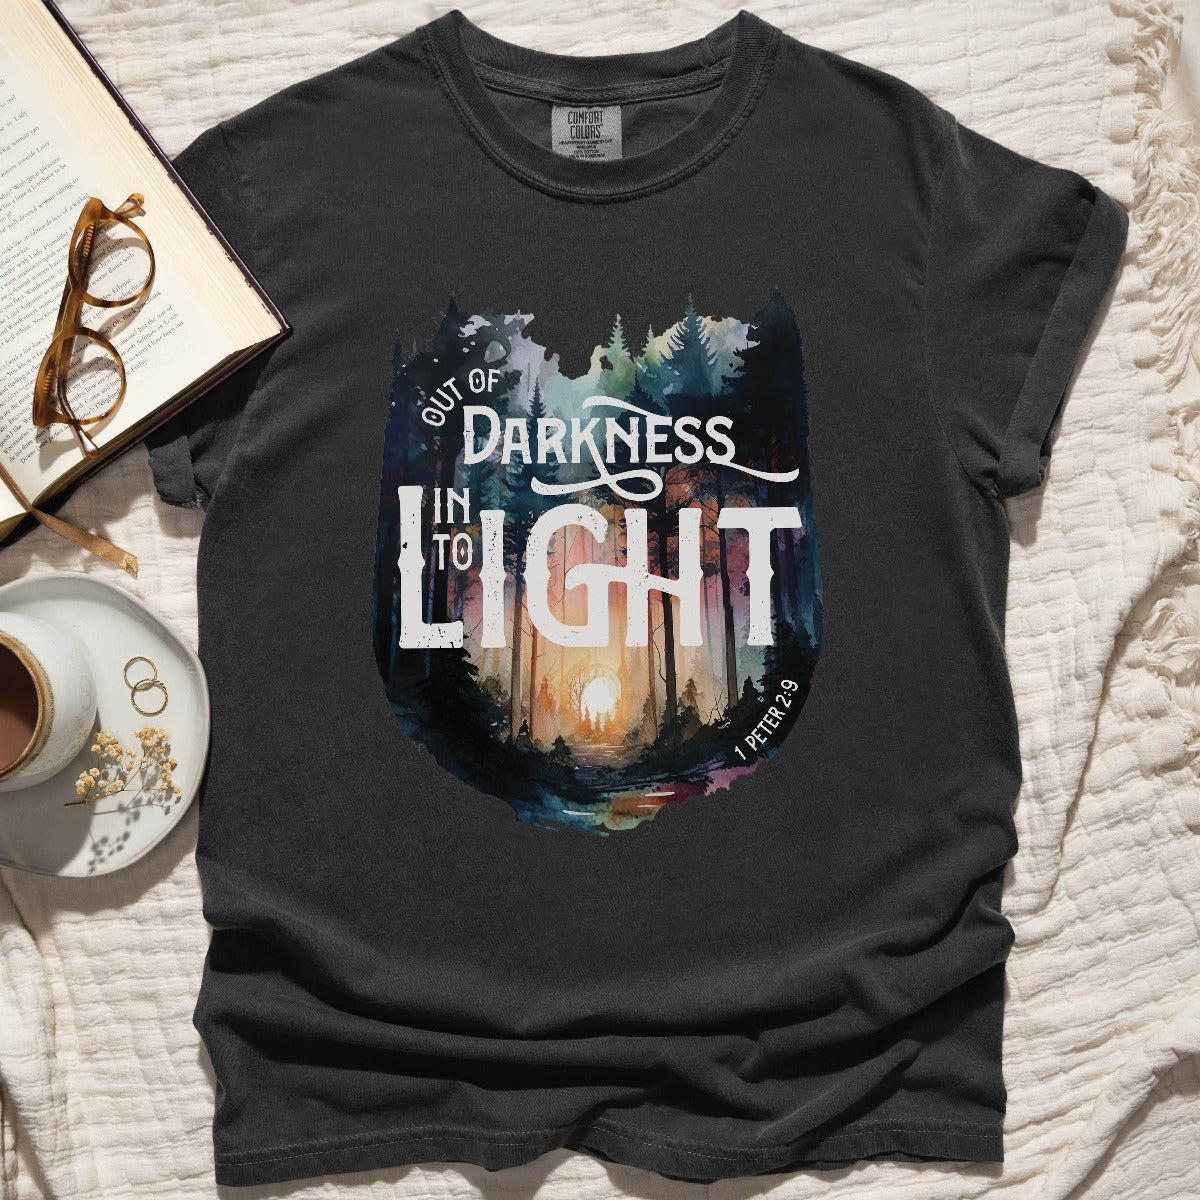 Pepper distressed black color garment dyed Comfort Colors C1717 unisex faith-based Christian t-shirt with "Out of Darkness, Into Light" 1 Peter 2:9 bible verse and watercolor moody forest trees outdoor scene, designed for men and women